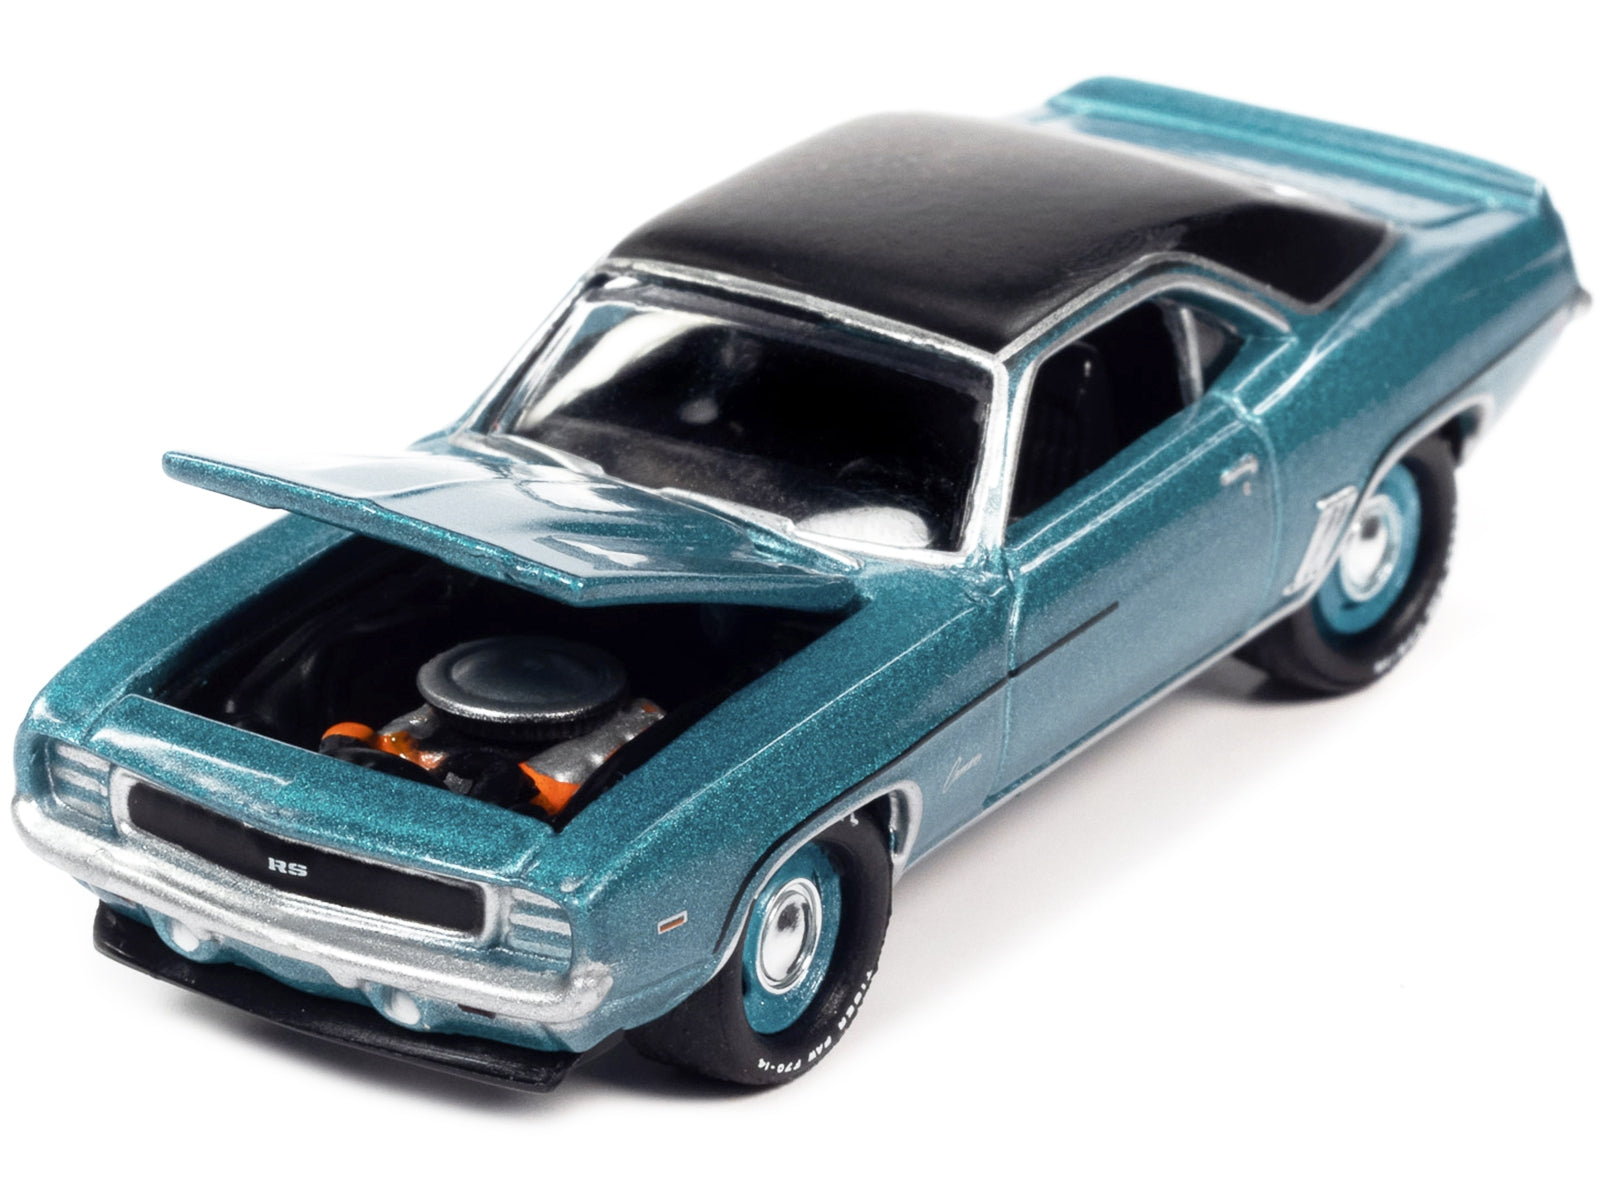 1969 Chevrolet COPO Camaro RS Azure Turquoise Metallic with Black Top "MCACN (Muscle Car and Corvette Nationals)" Limited Edition to 4140 pieces Worldwide "Muscle Cars USA" Series 1/64 Diecast Model Car by Johnny Lightning